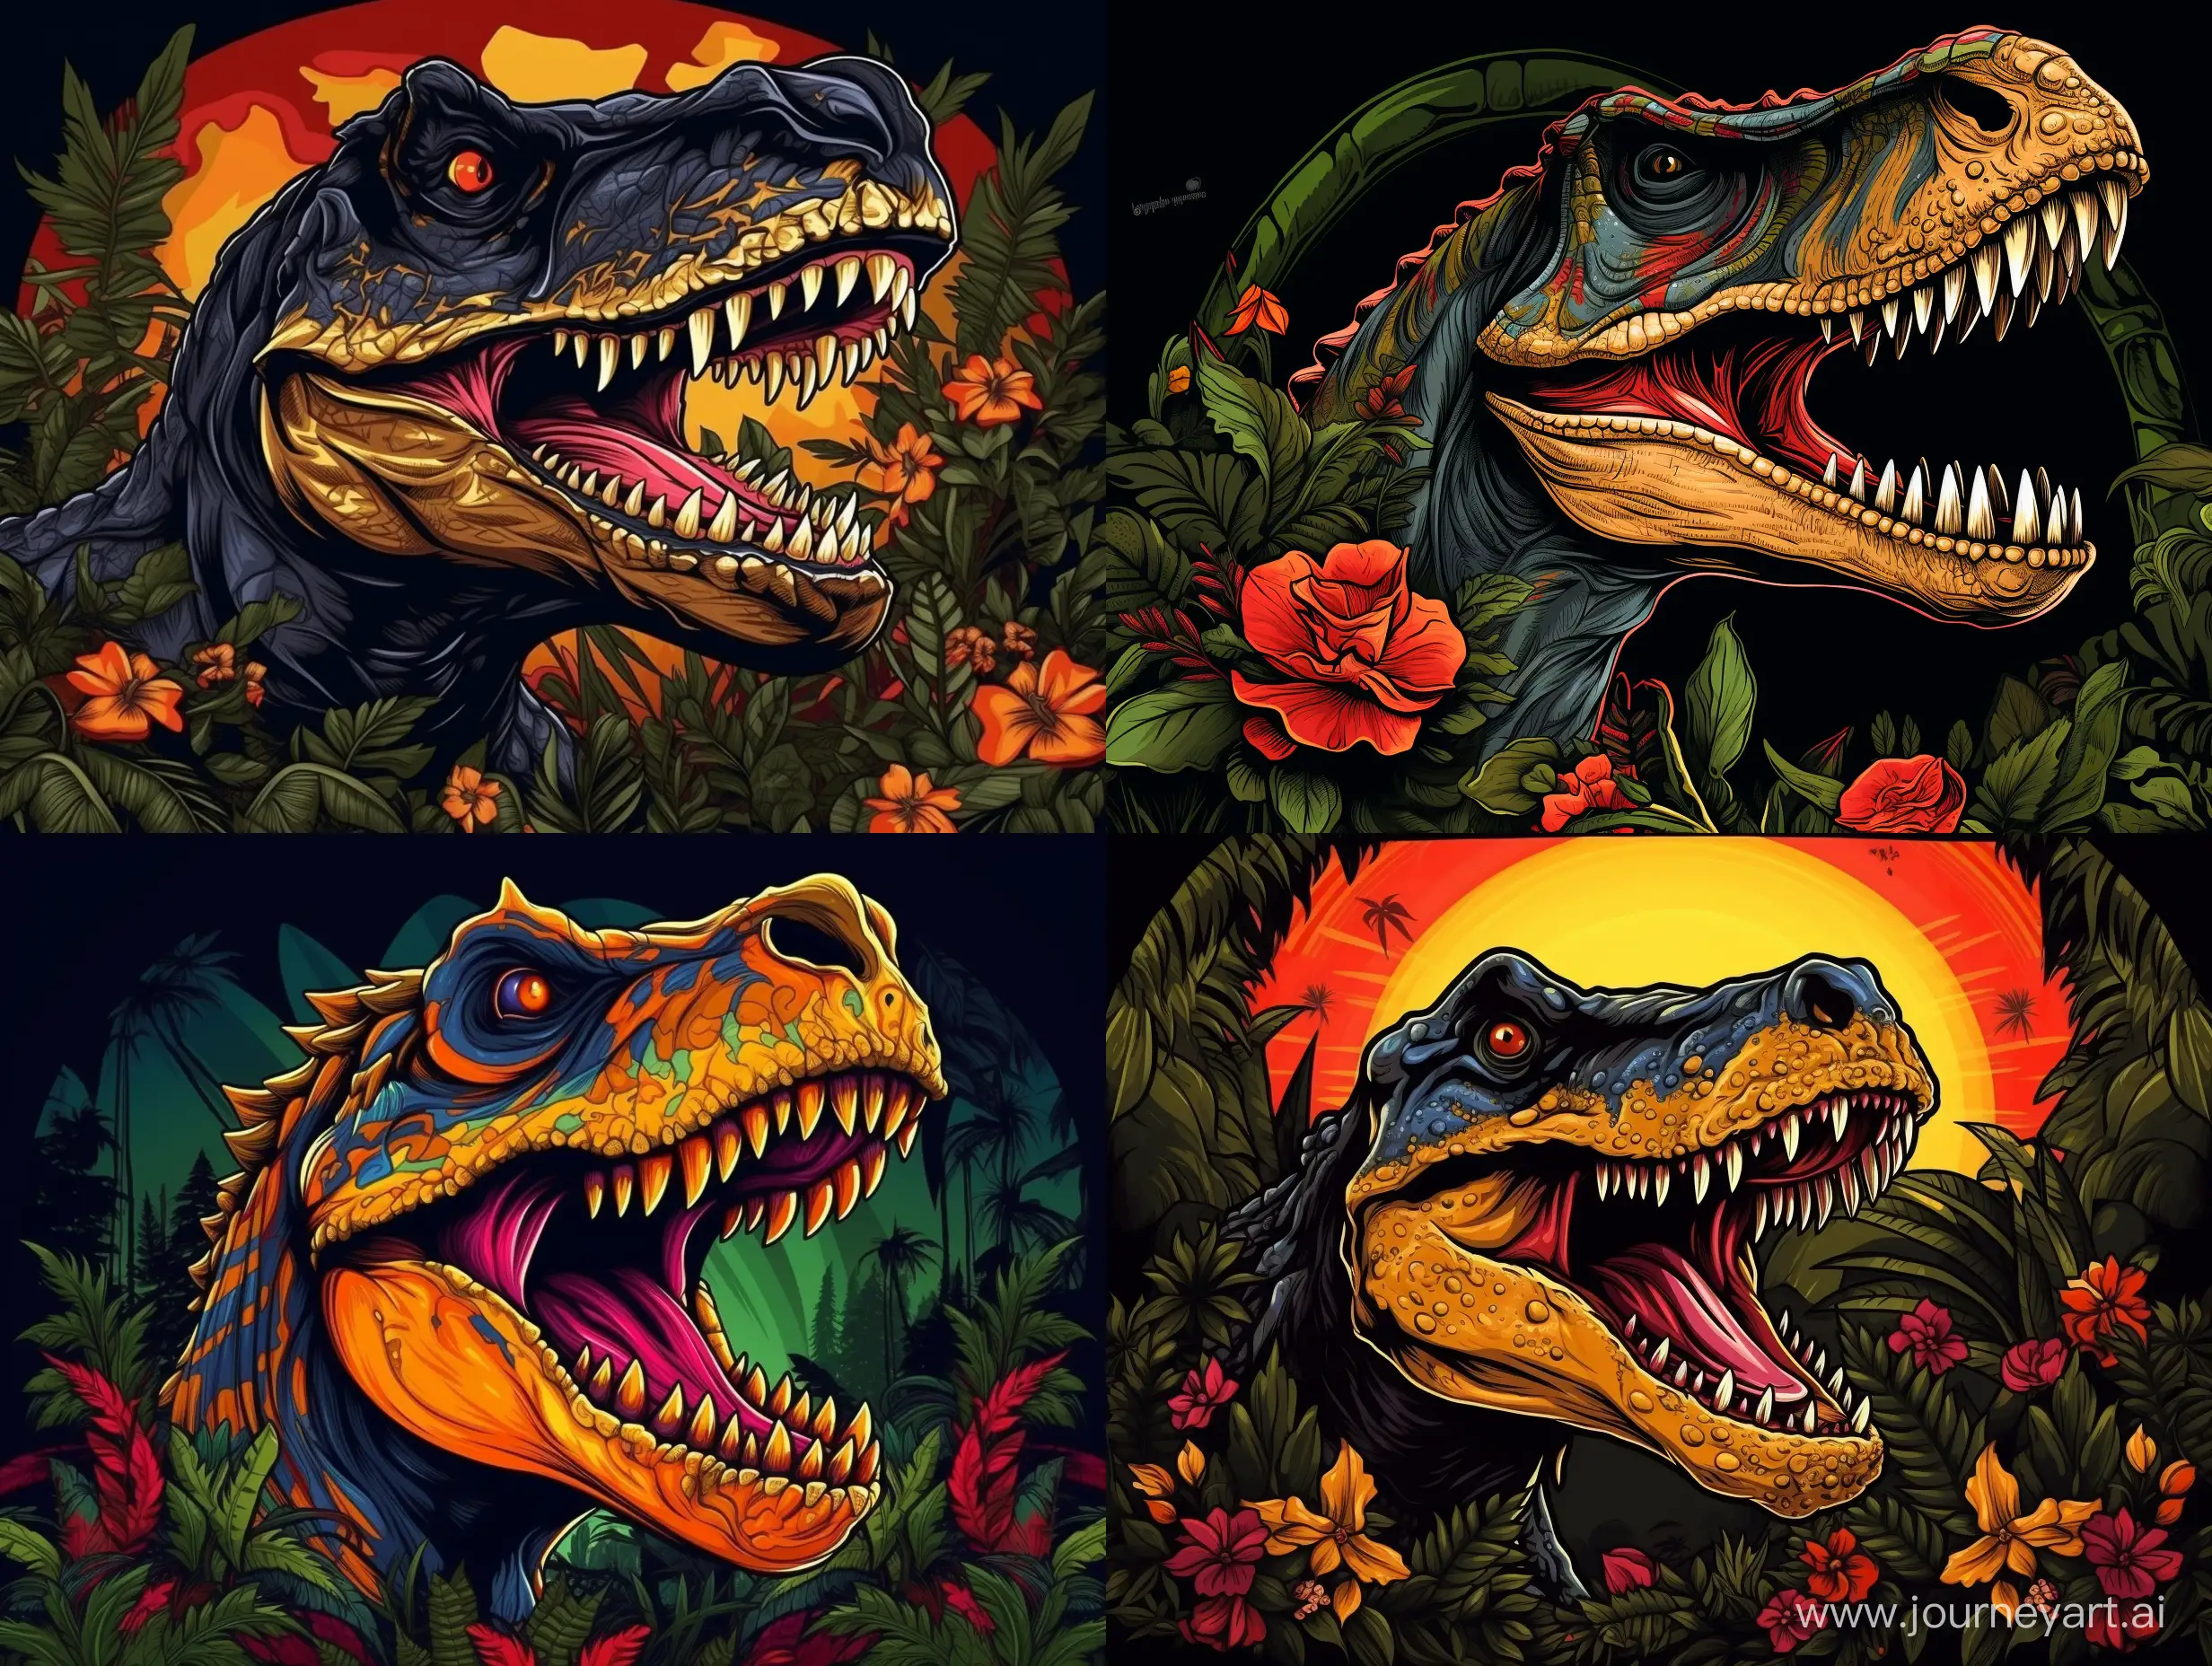 Portrait in profile, evil tyrannosaurus with open mouth, black color, with golden crown on his head, on the background of tropical forest pattern, pop art style, caricature, restrained colors